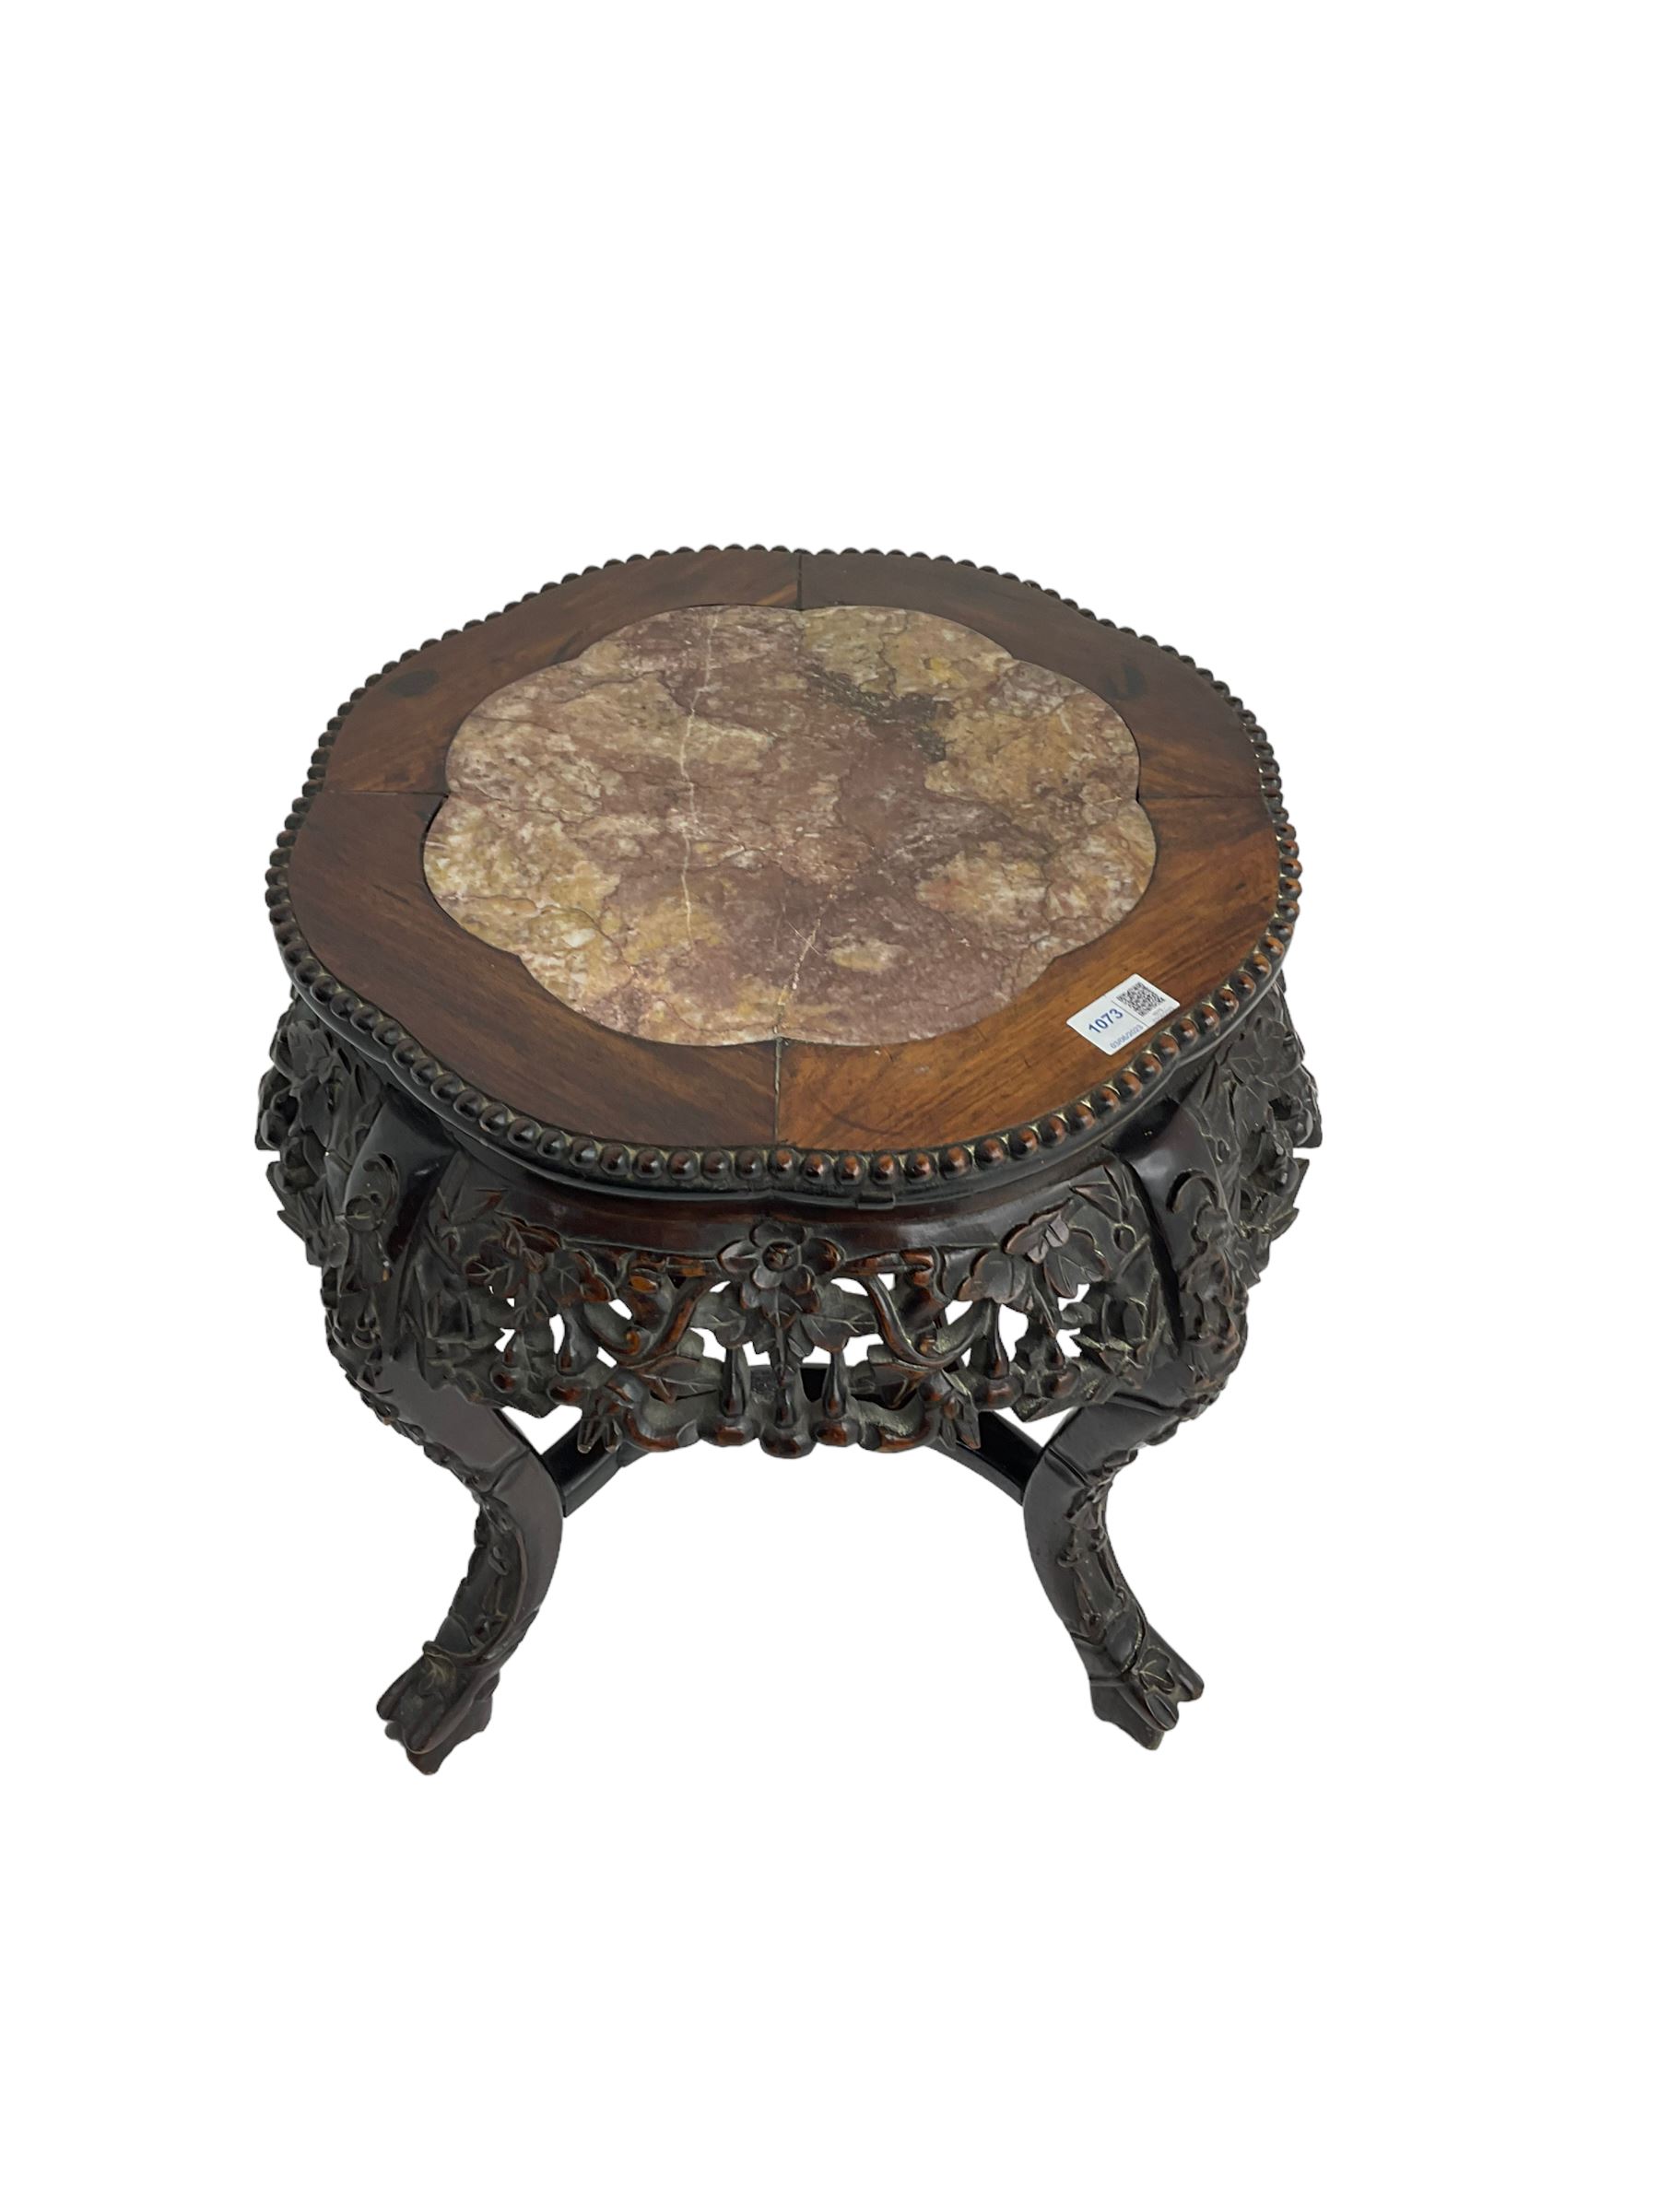 Chinese carved hardwood occasional table - Image 3 of 5